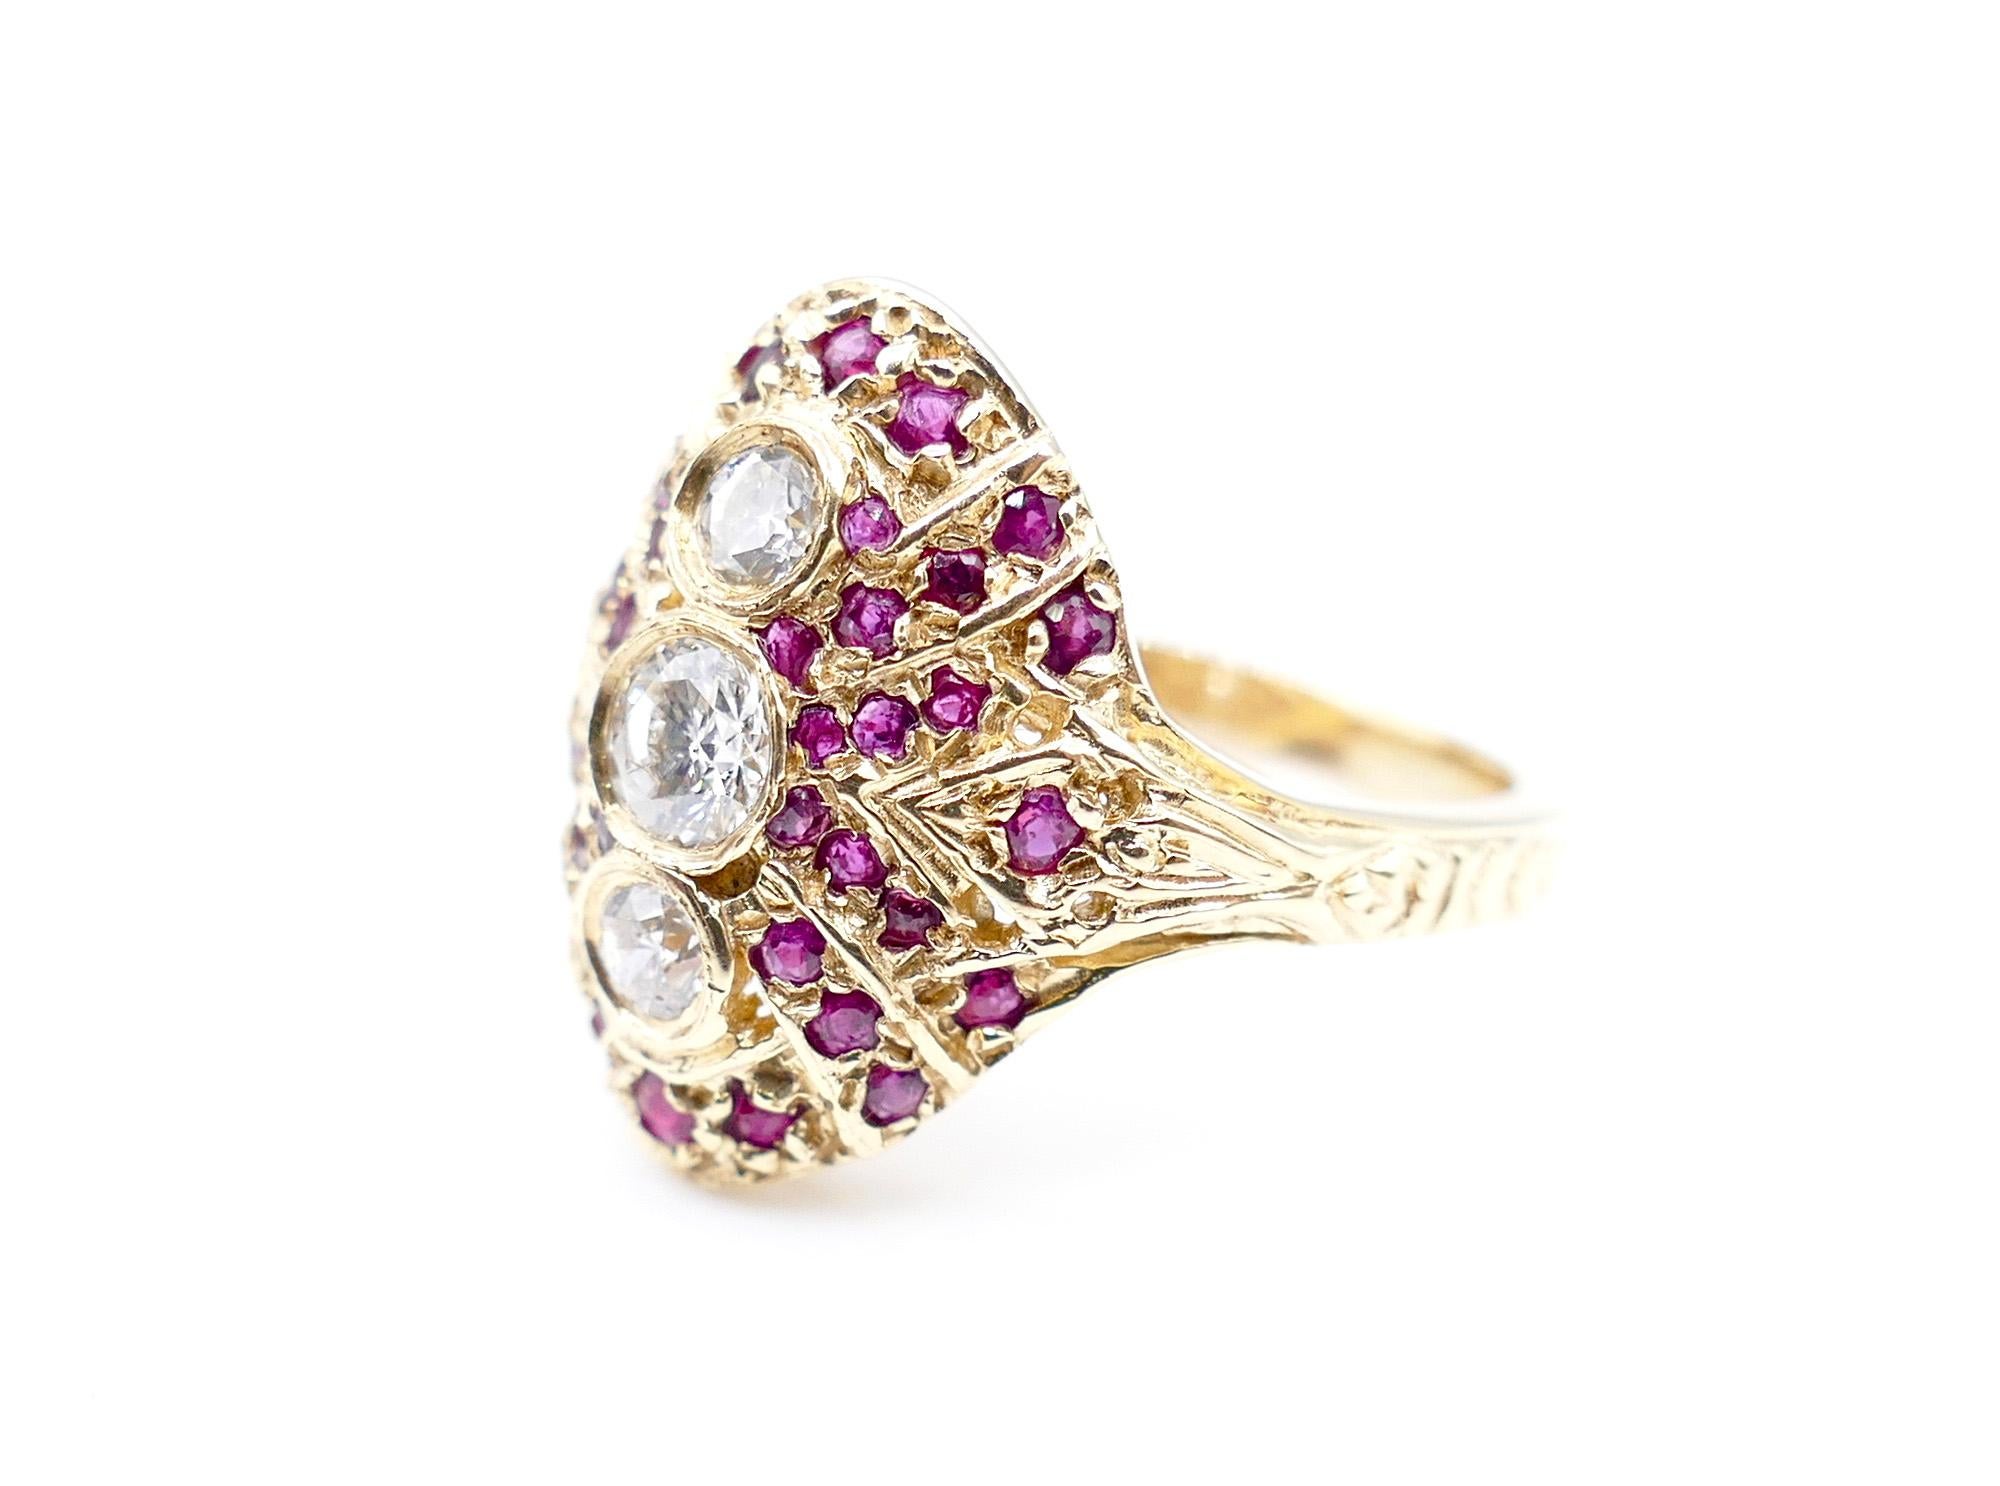 This gorgeous, Antique-Style Dinner custom ring includes 3 shiny white, round-cut, bezel-set Diamonds that line up at the center, weighing in at 0.5 Carats total. The diamonds are surrounded by numerous small rubies. The rubies, weigh in at 1 Carat